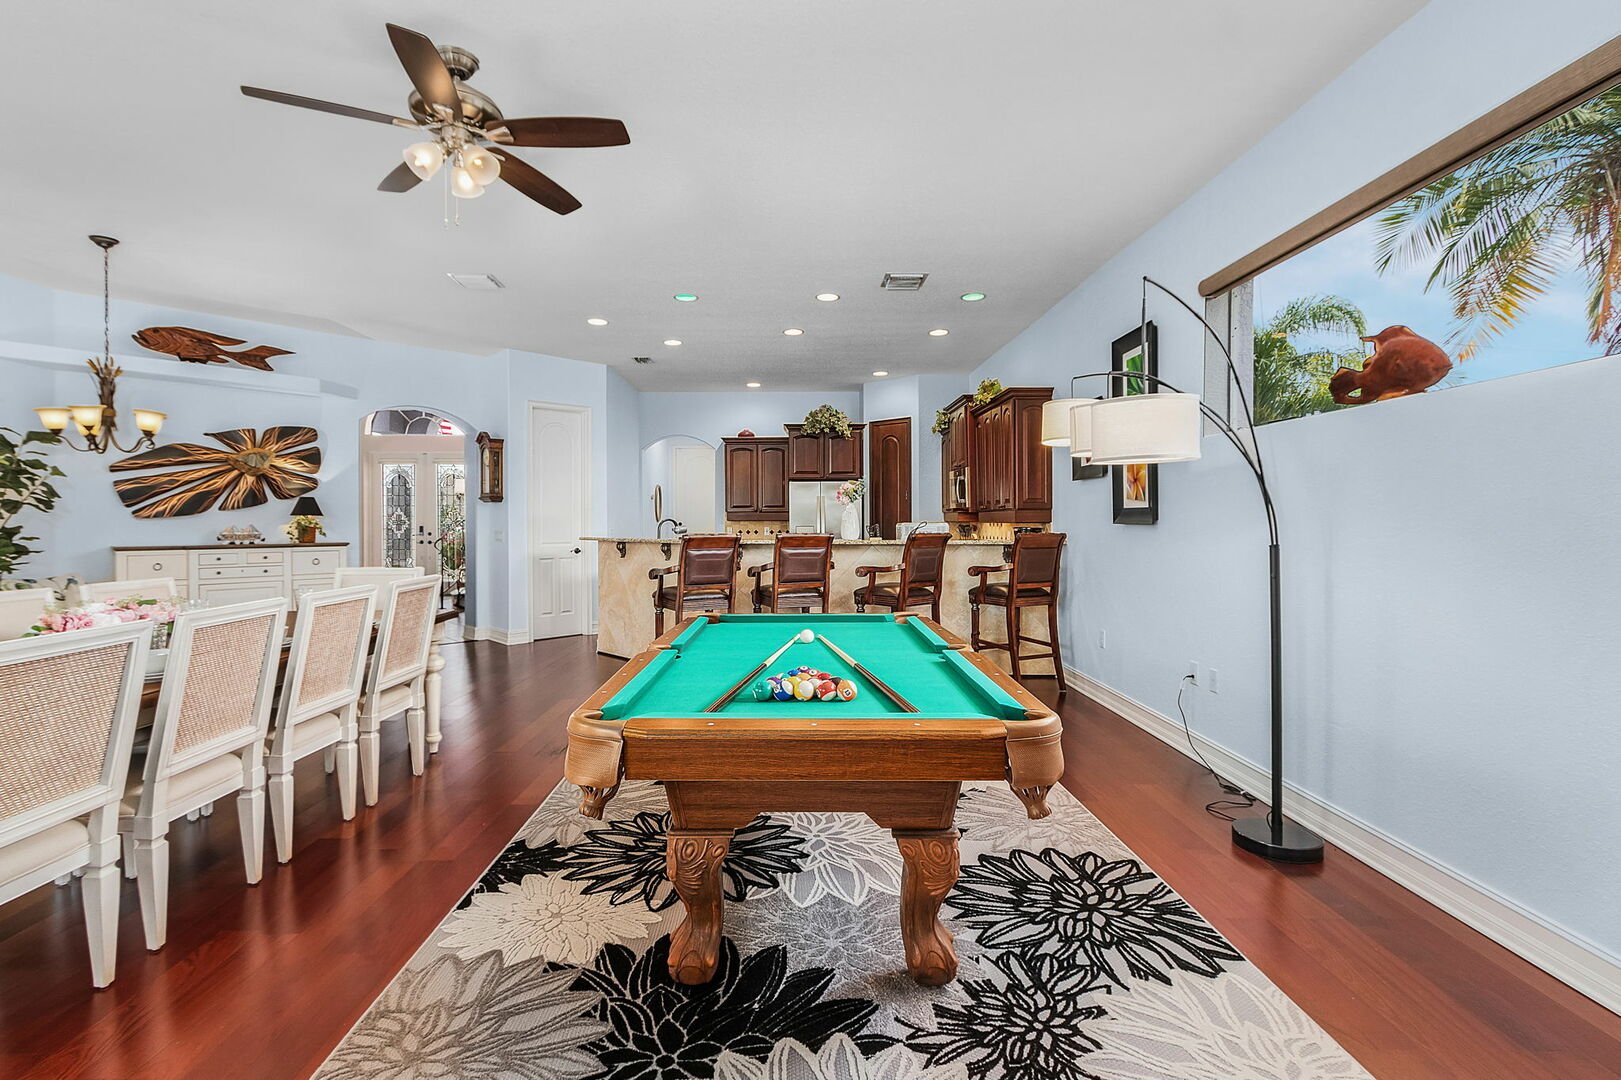 Vacation Rental with Pool Table